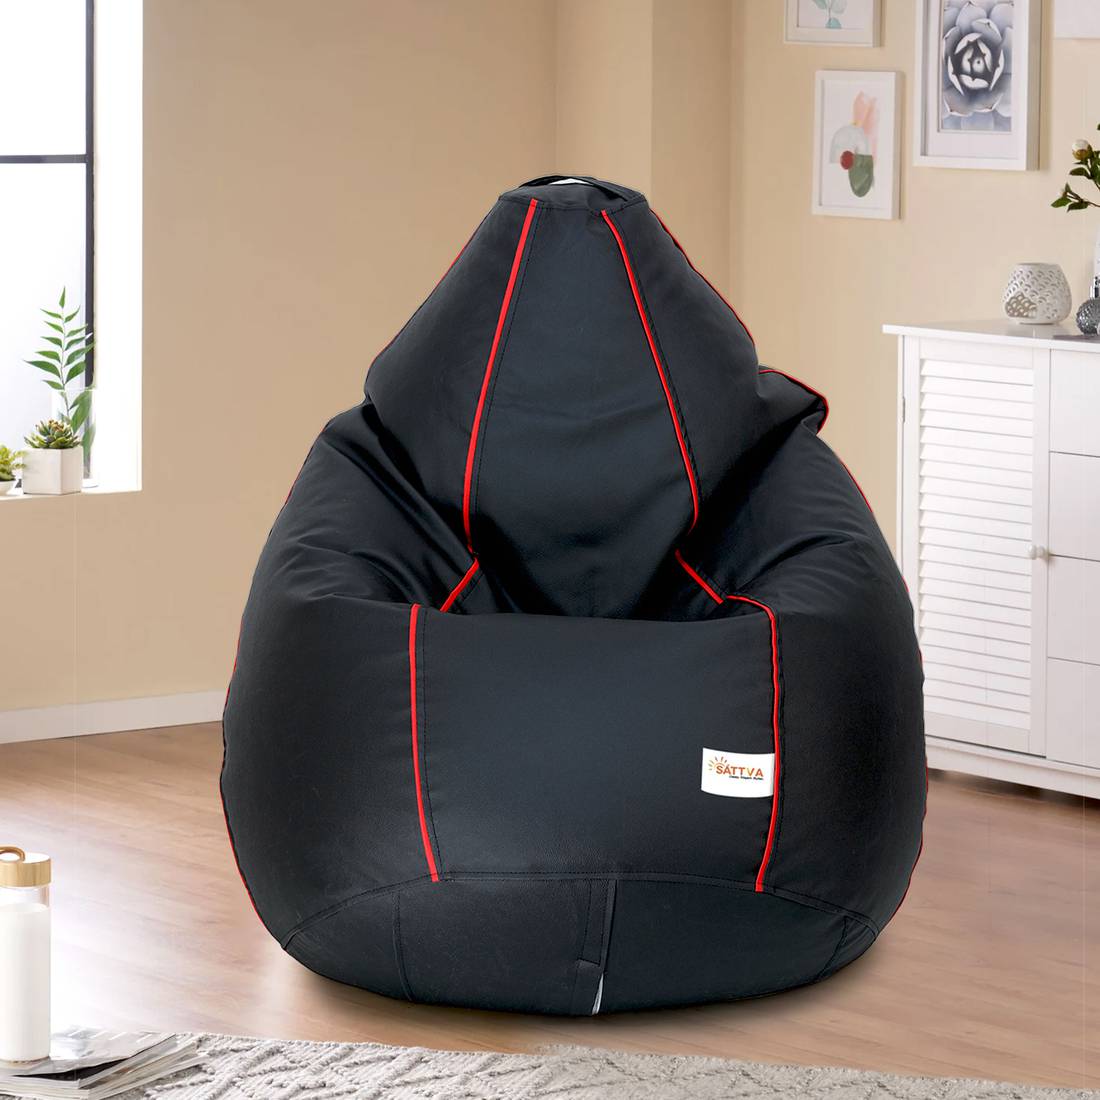 Buy Muddha Sofa Bean Bag Cover XXXL Black and Red Online in India at  Best Price  Modern Bean Bags  Living Room Furniture  Furniture  Wooden  Street Product